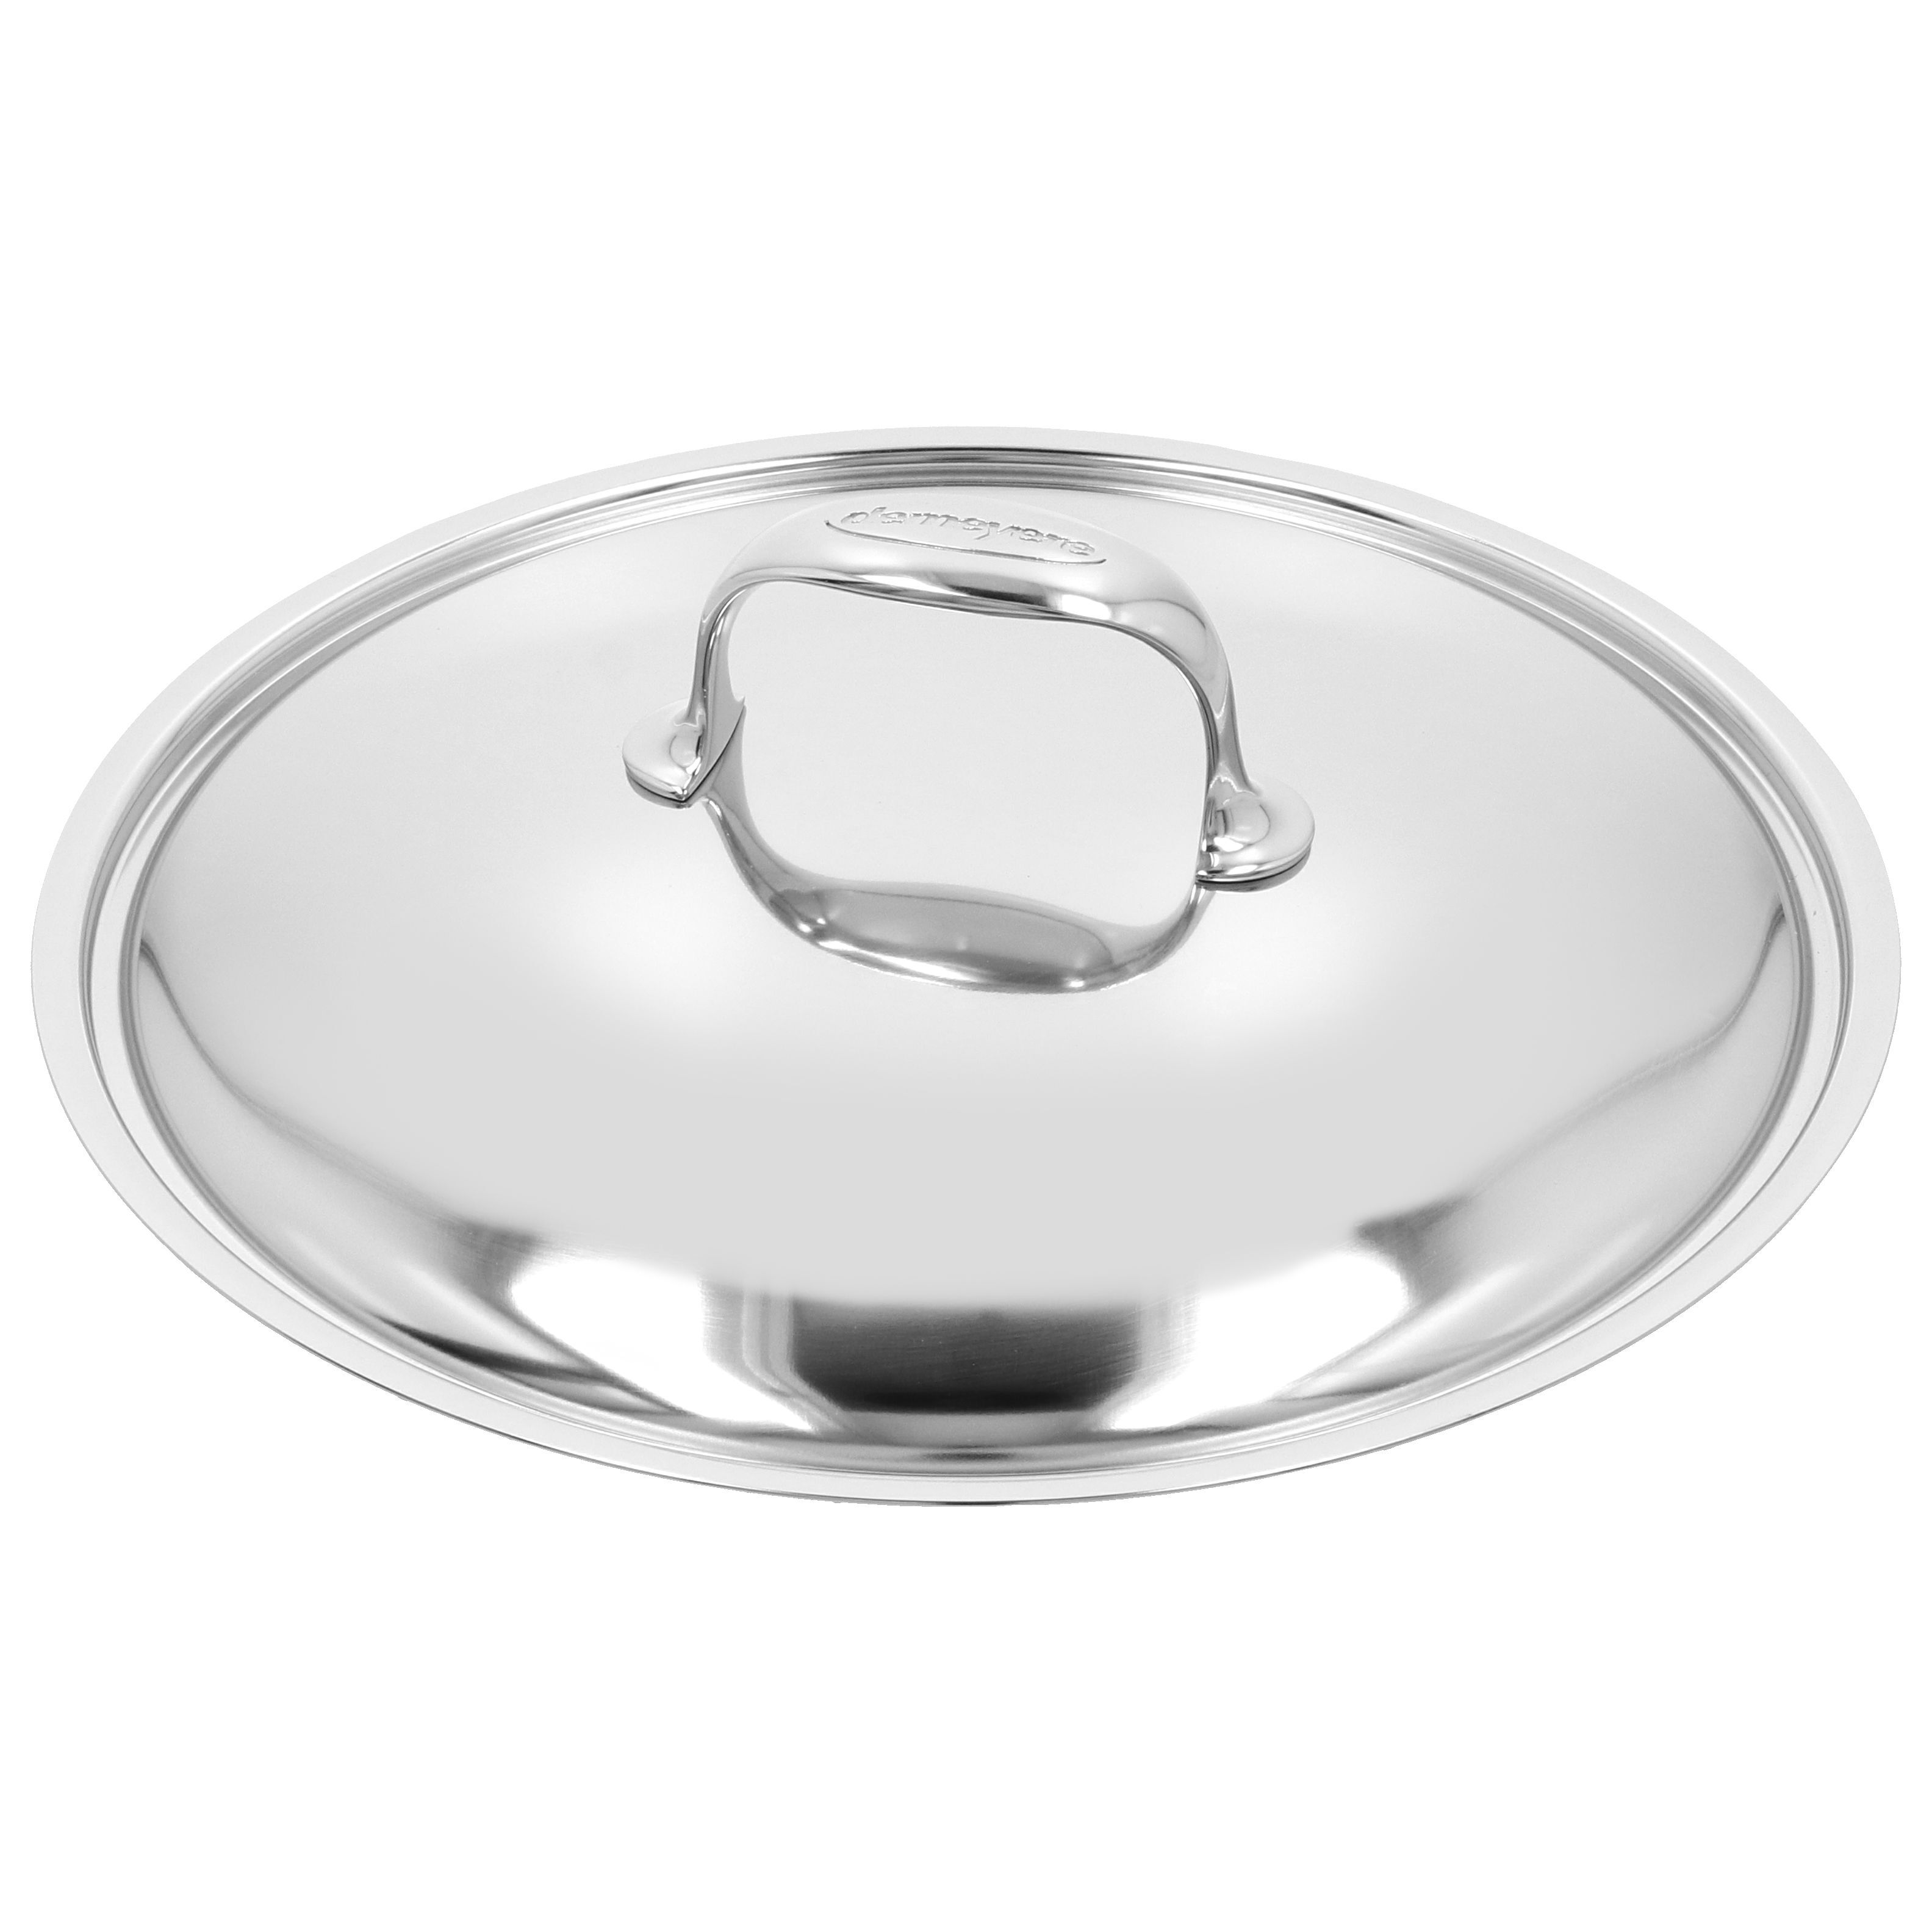 8.9 qt, 18/10 Stainless Steel, Dutch Oven with Lid